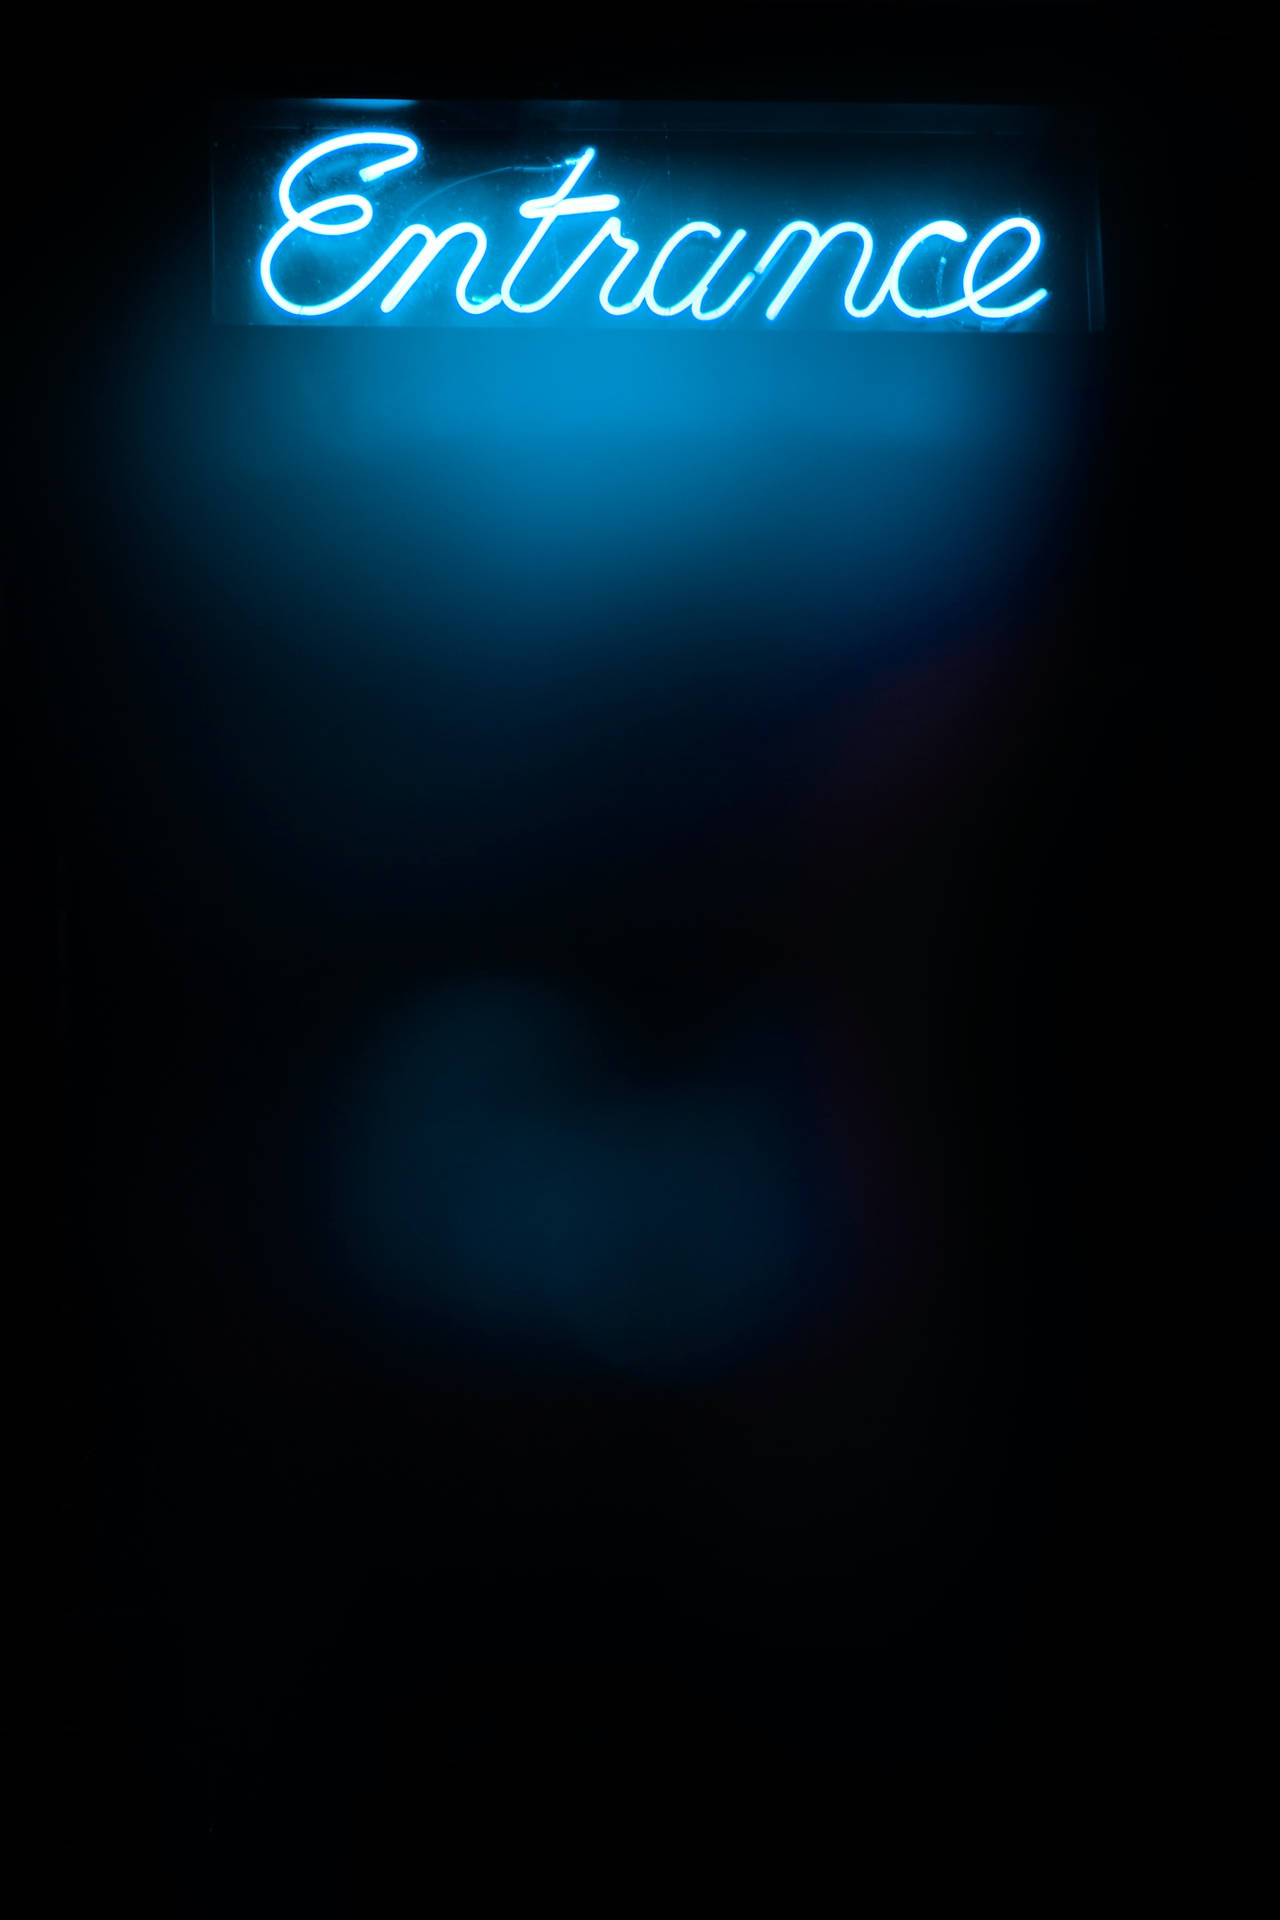 Entrance Sign In Neon Blue iPhone Wallpaper